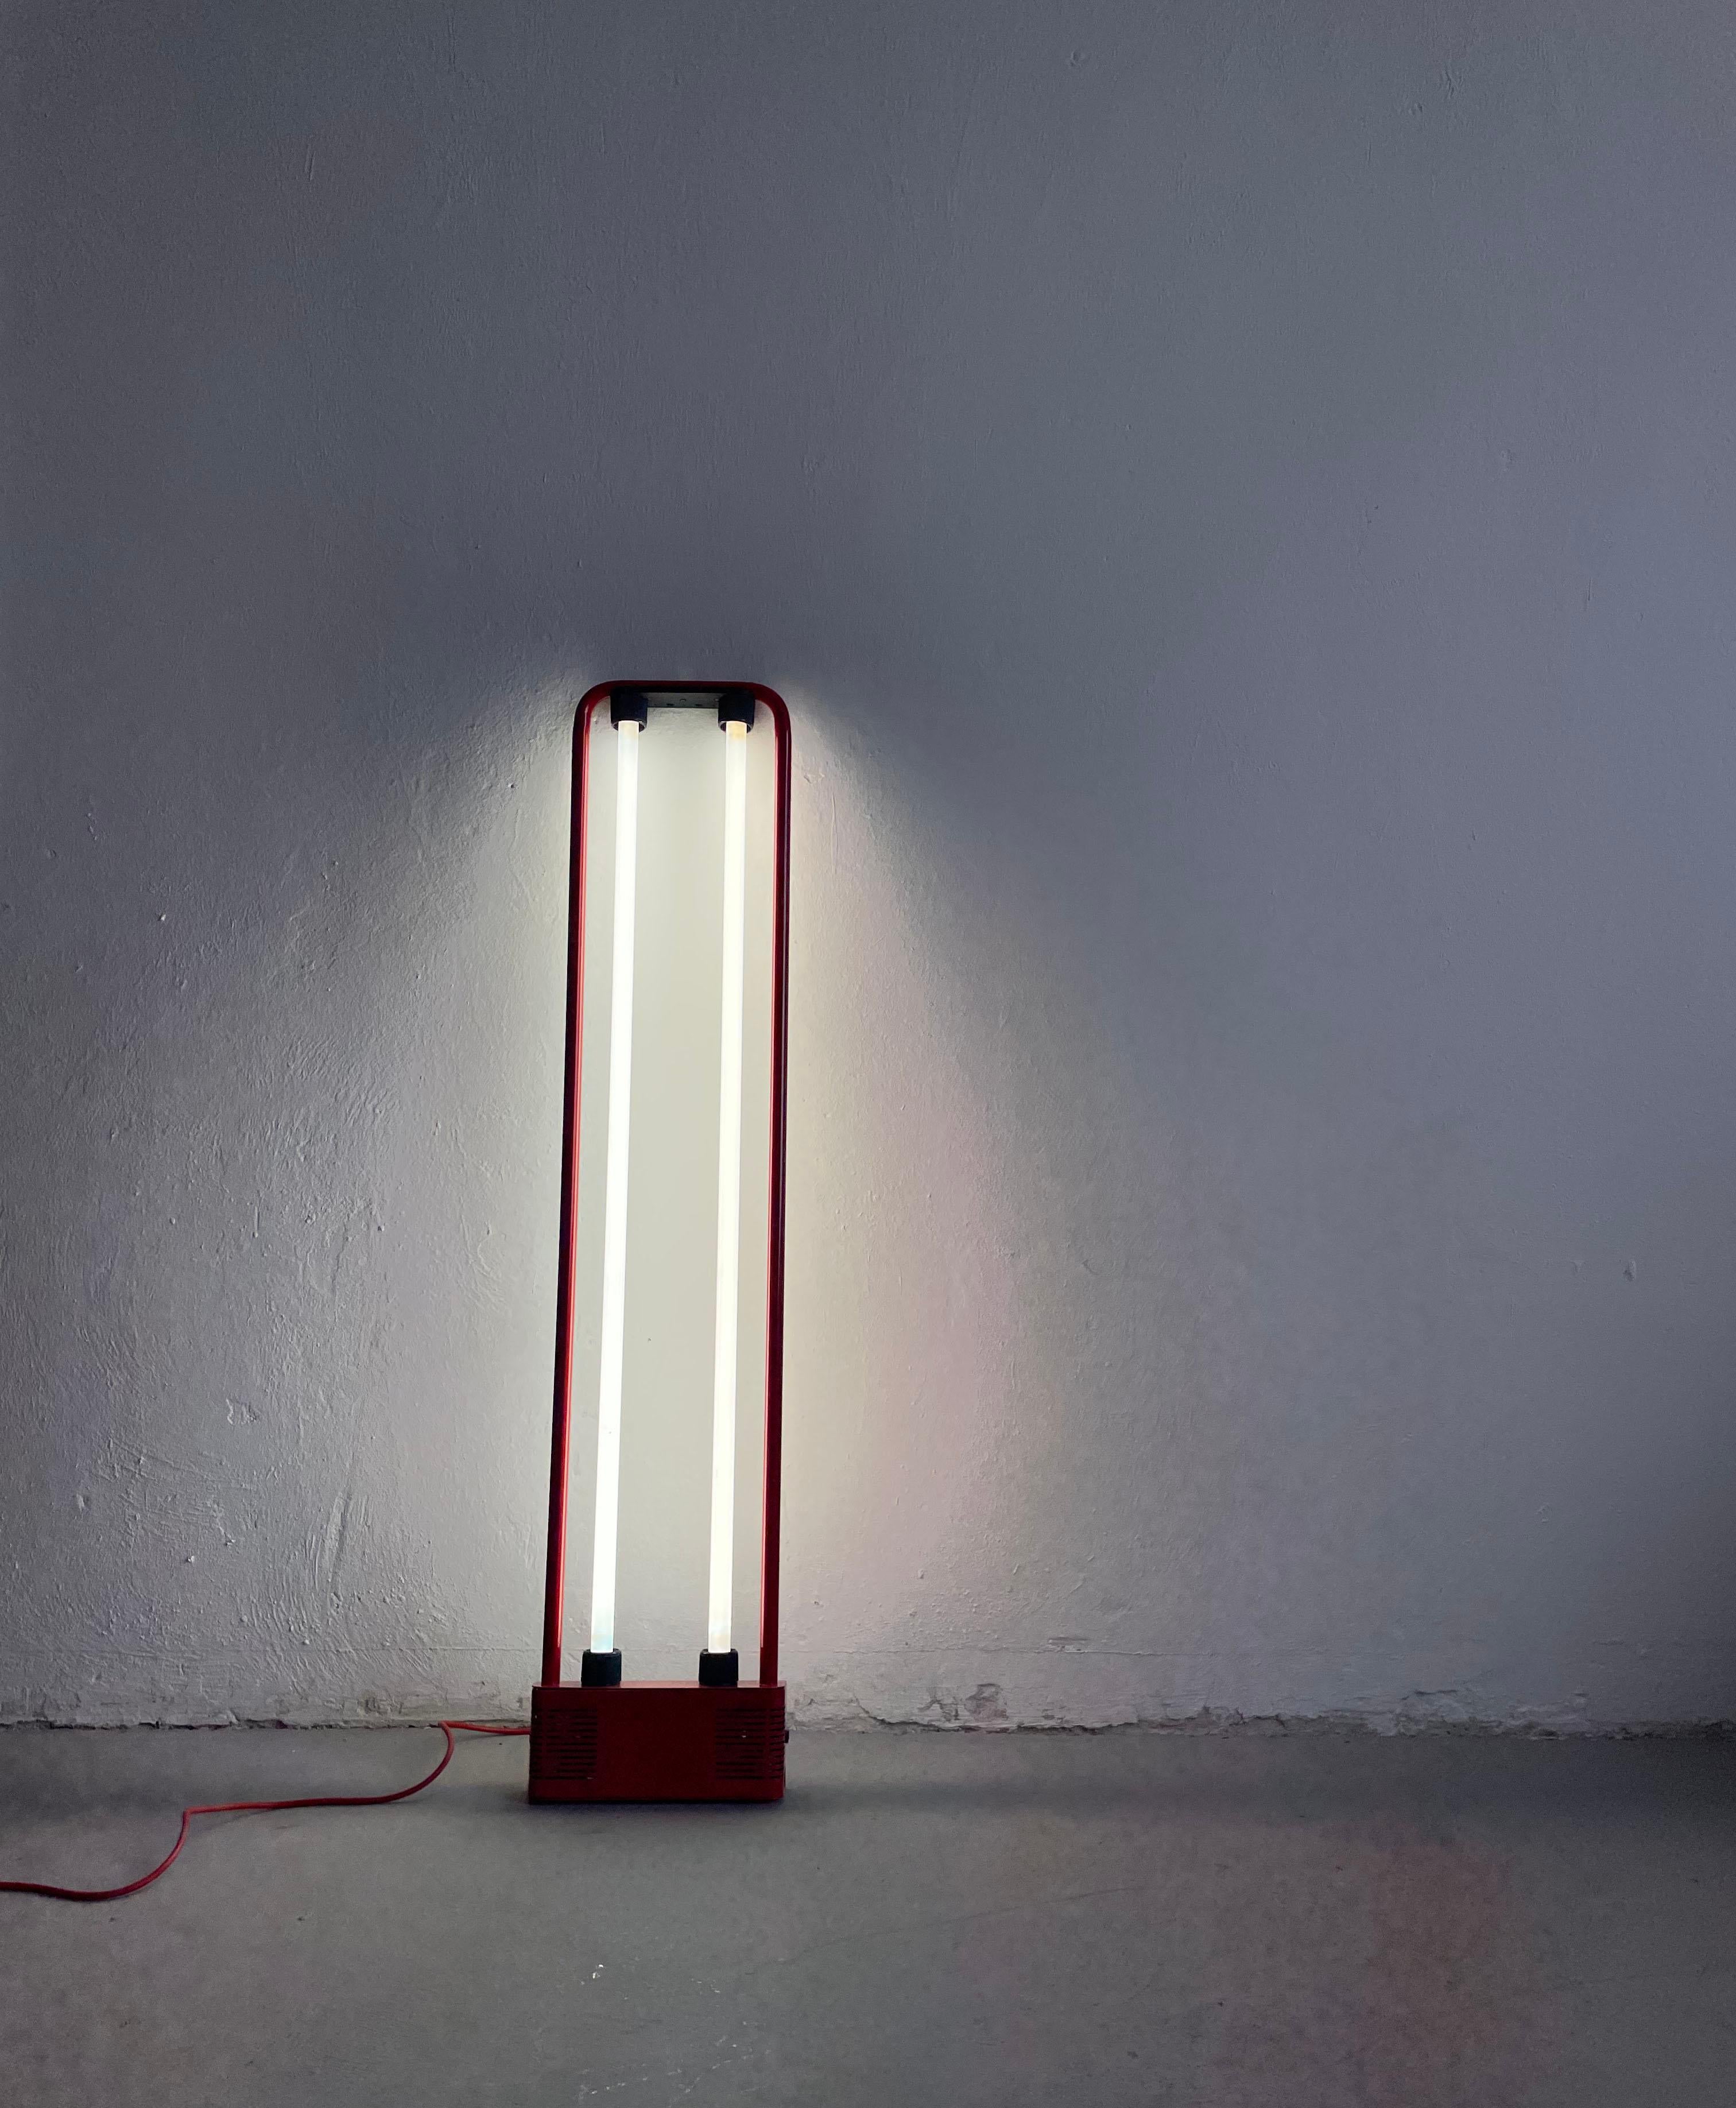 Red Lacquered Metal Neon lamp by Gian N. Gigante for Zerbetto, Italy 1980s

Measurements - Width 30 cm x Depth 6 cm x Height 140 cm

The lamp can be used as a floor lamp but also has original metal parts that can be added to make a pendant